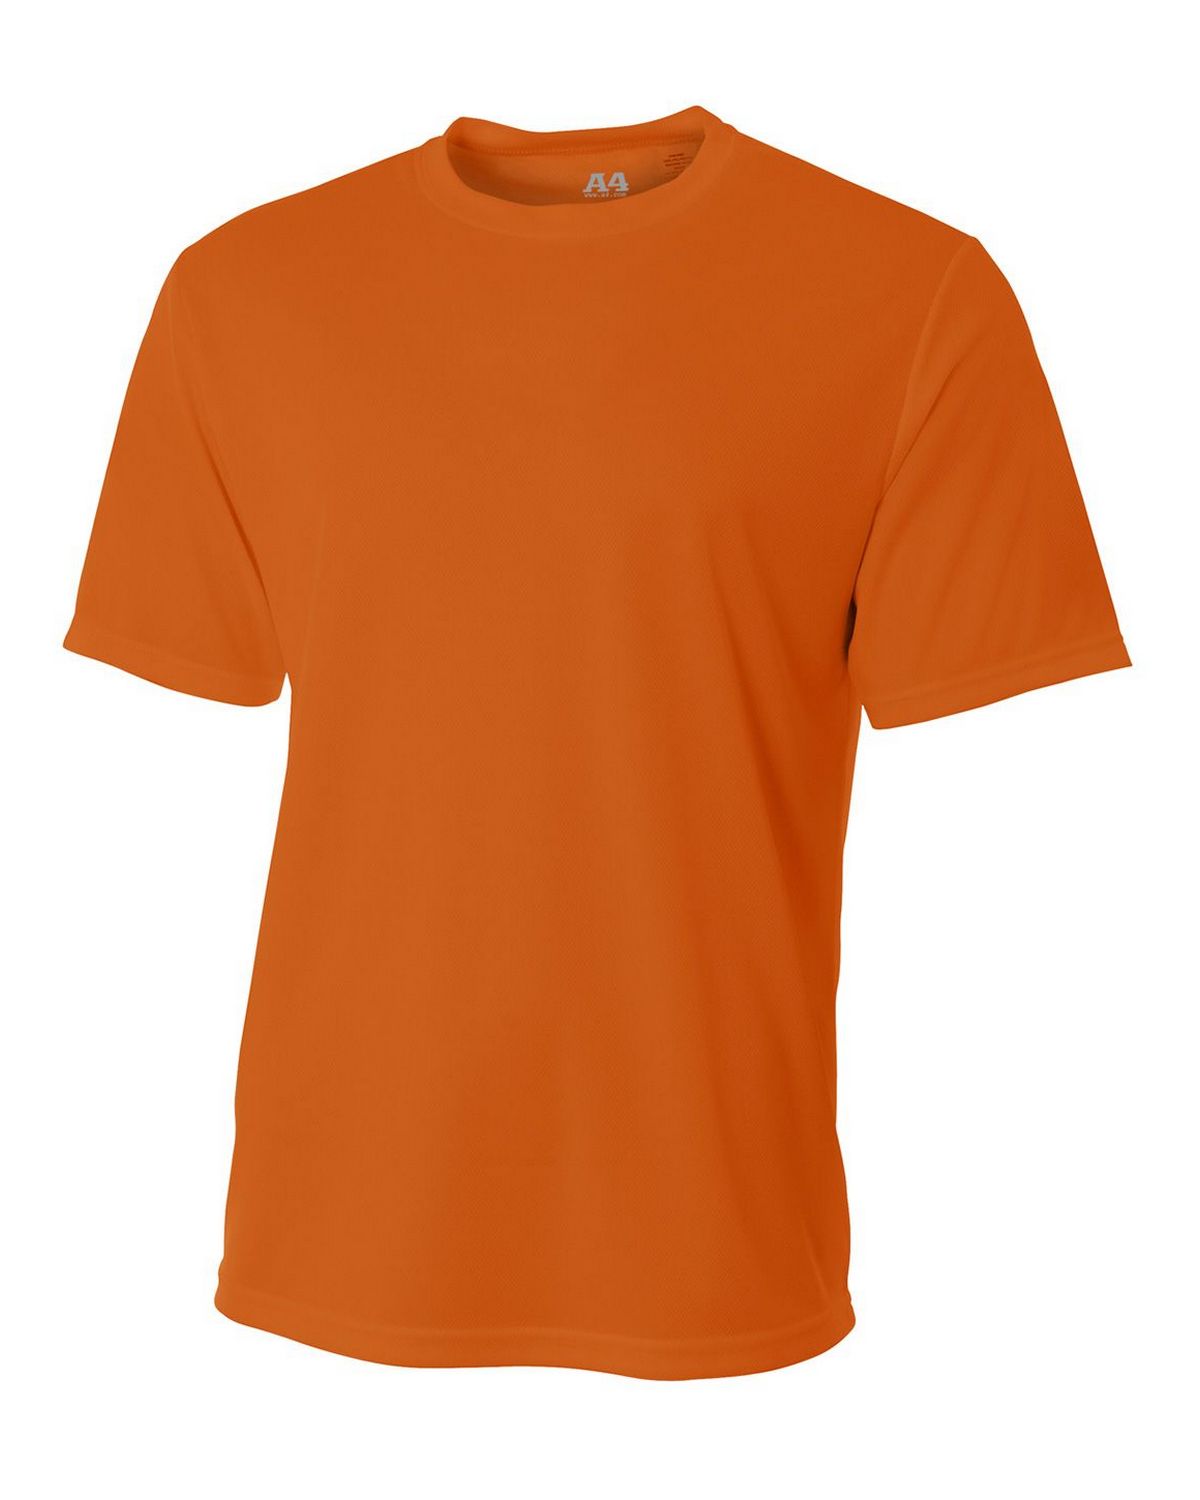 A4 N3252 Adult Textured Tech Tee - Shop at ApparelnBags.com